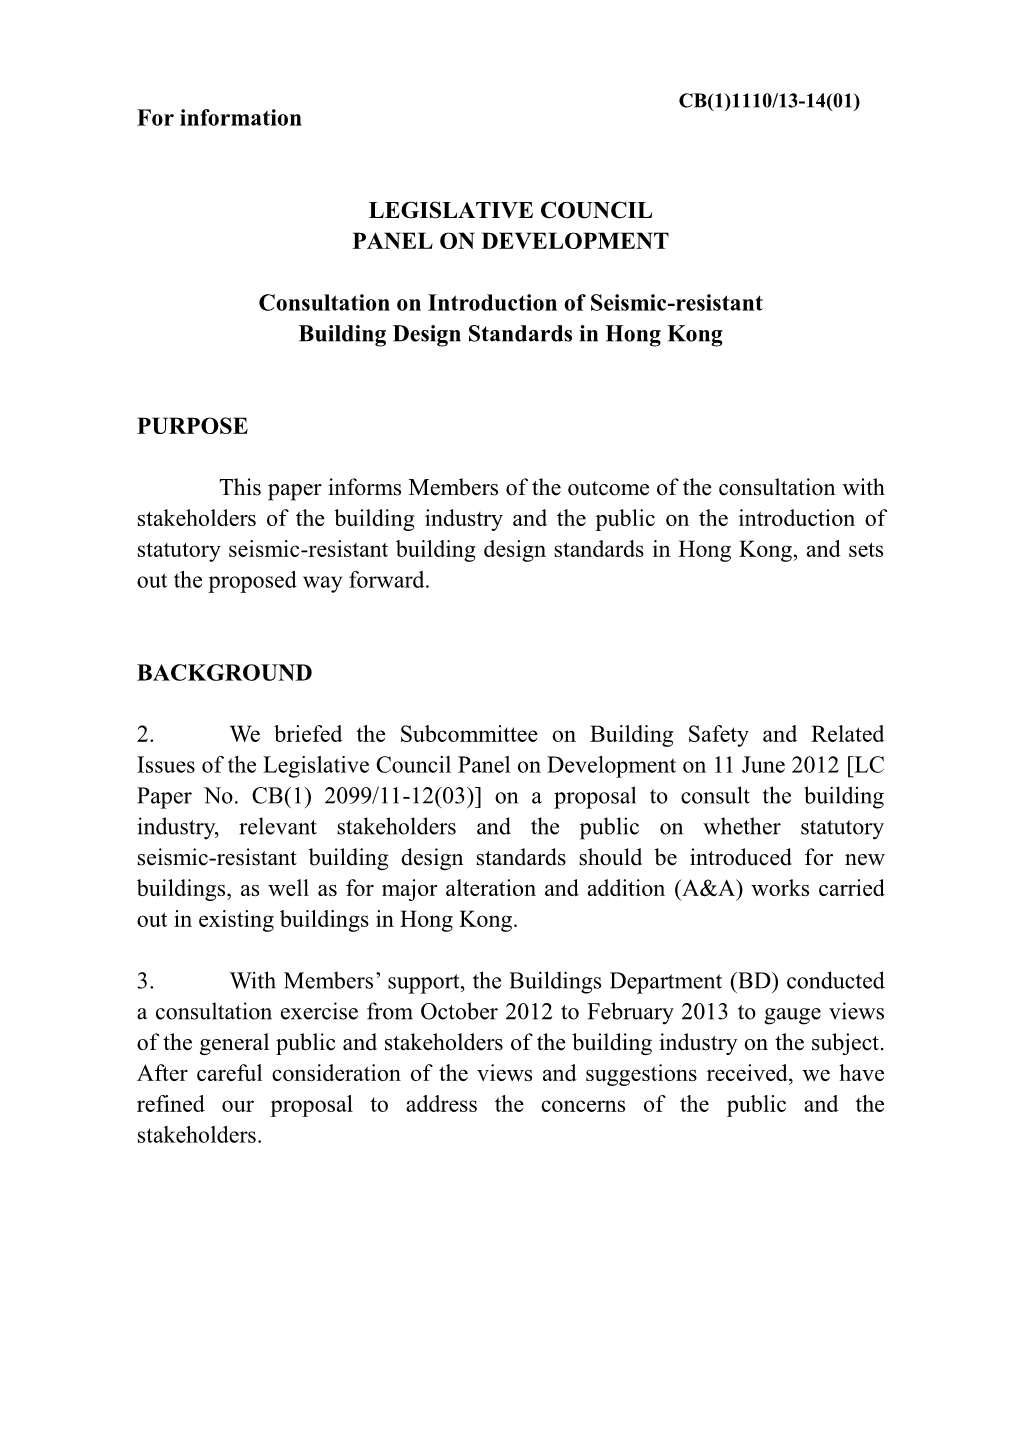 Administration's Paper on Consultation on Introduction of Seismic-Resistant